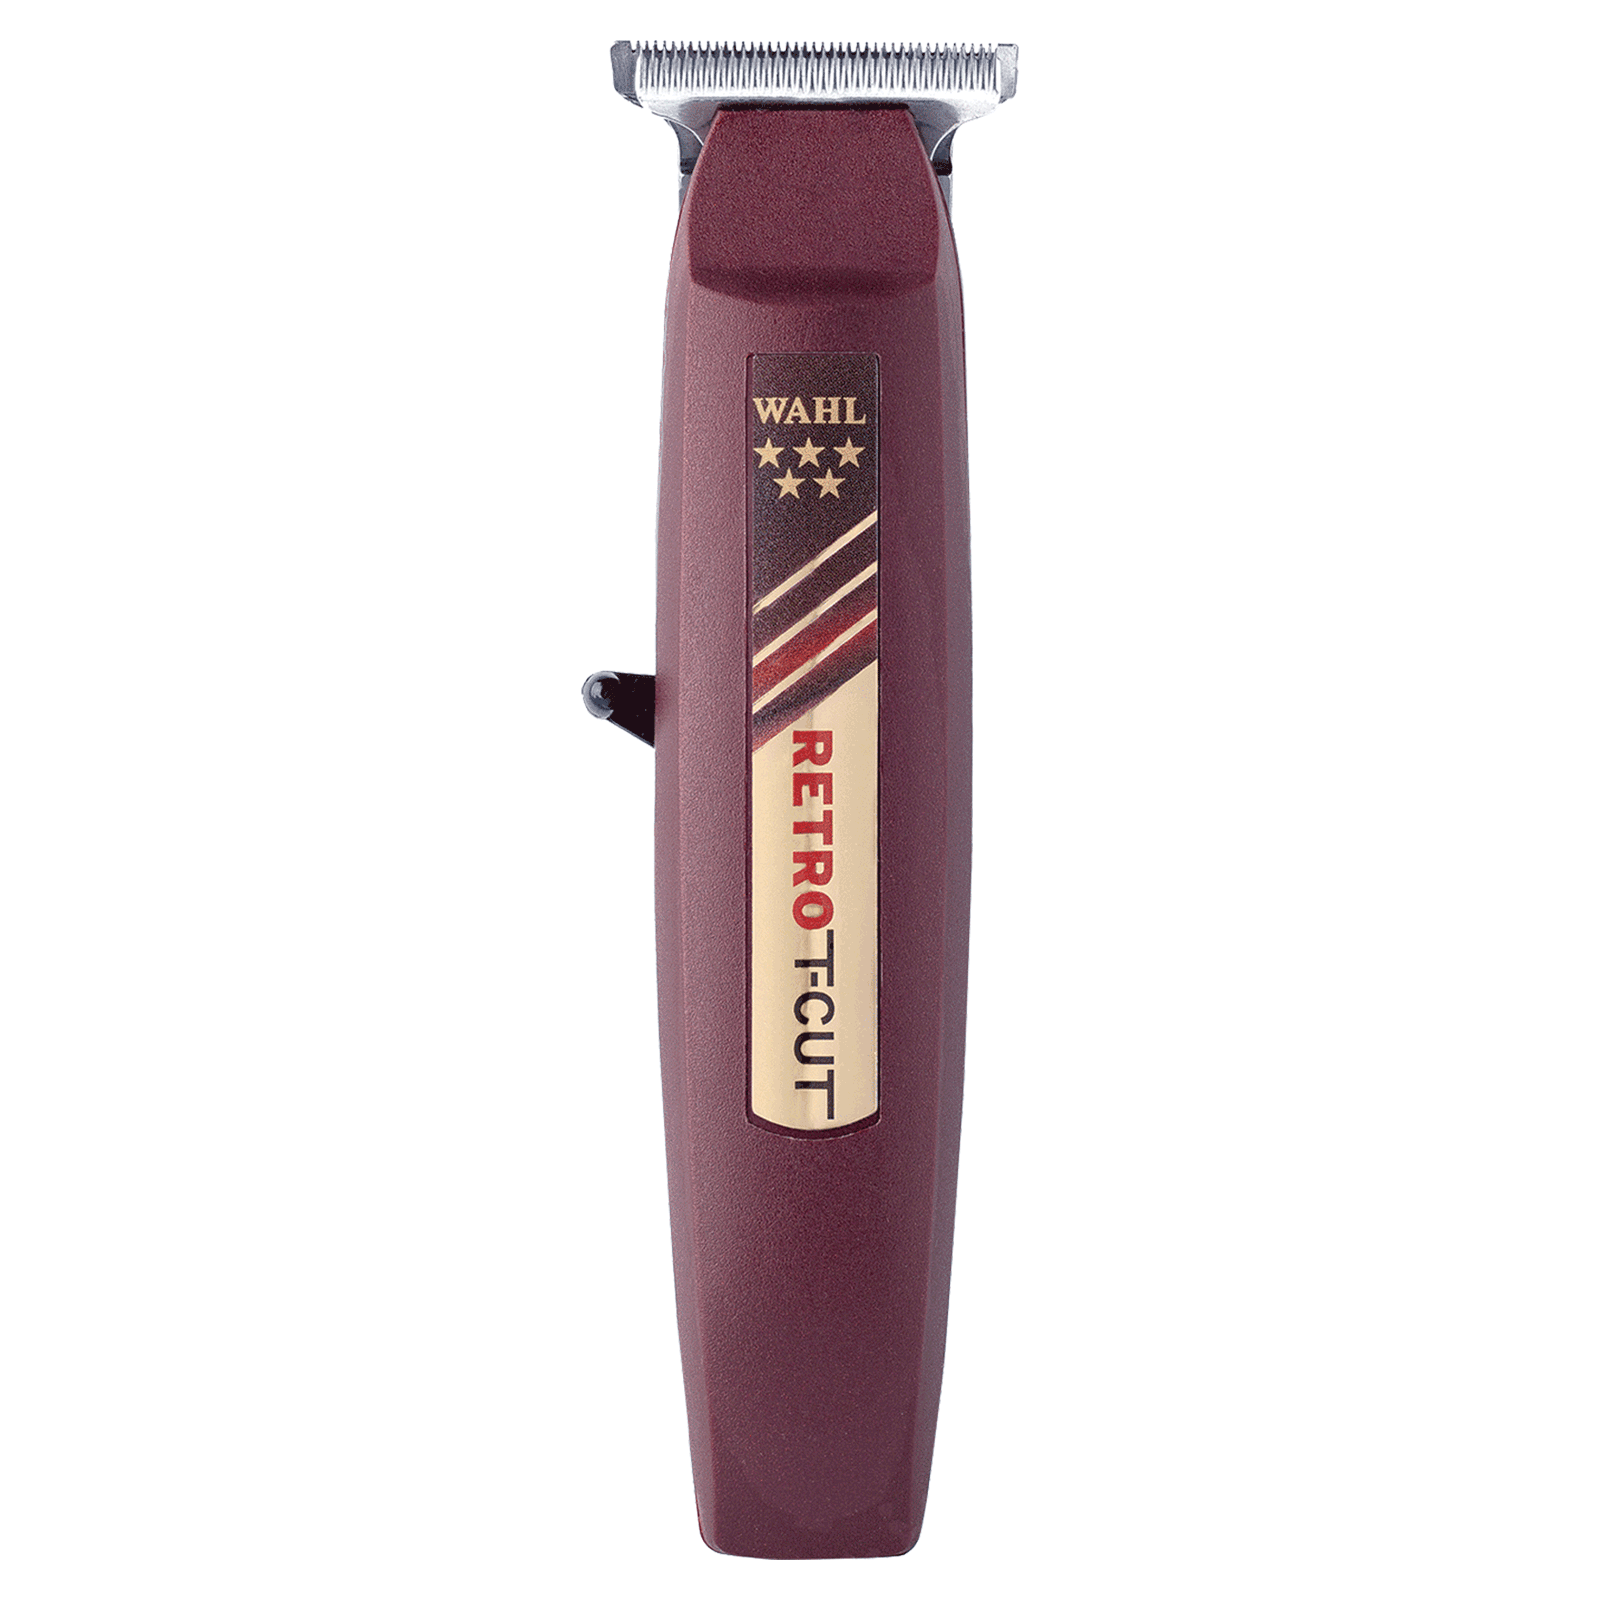 cosmoprof wahl clippers